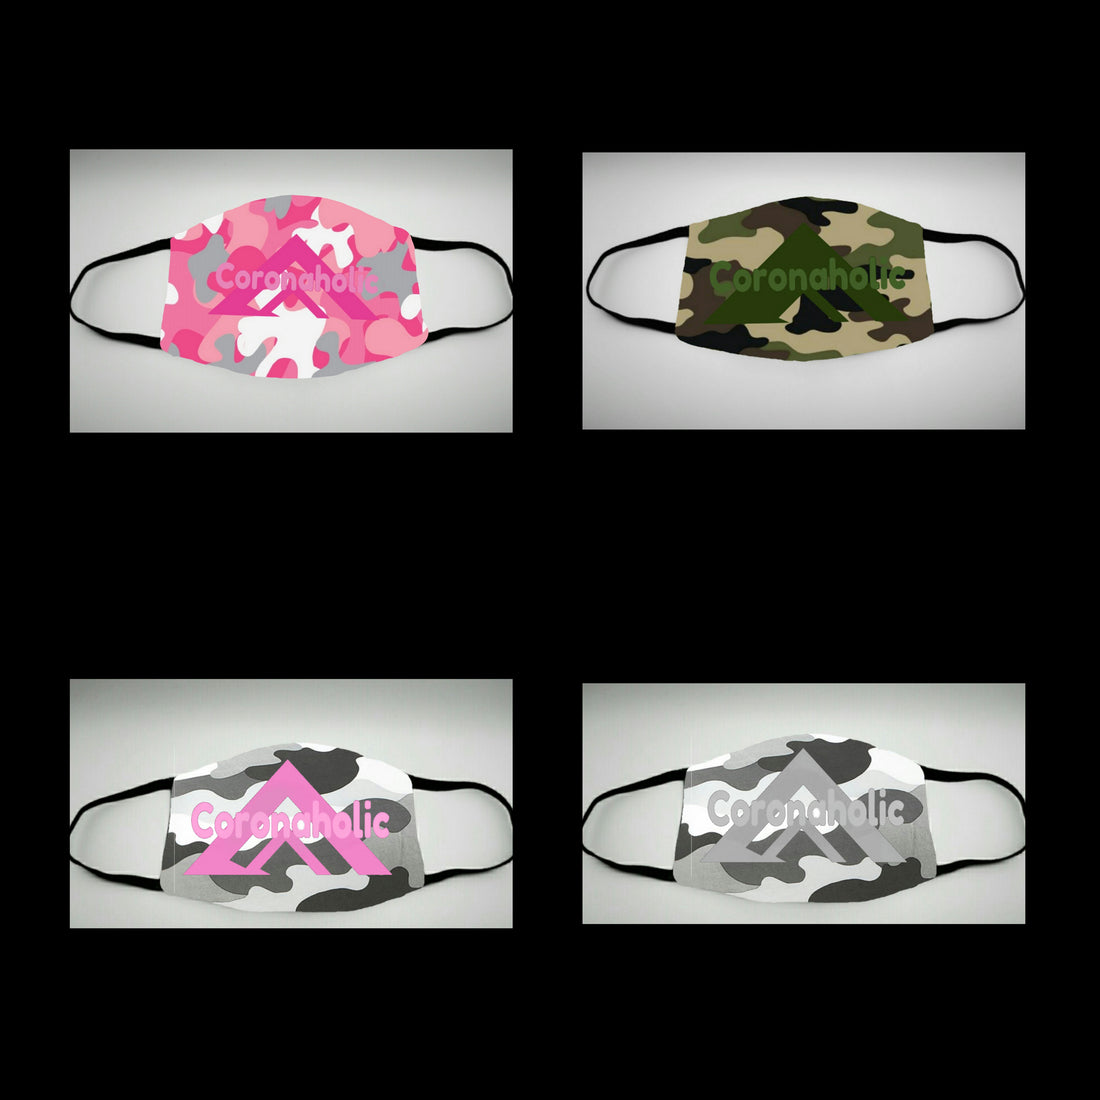 "Camouflage Line" is available